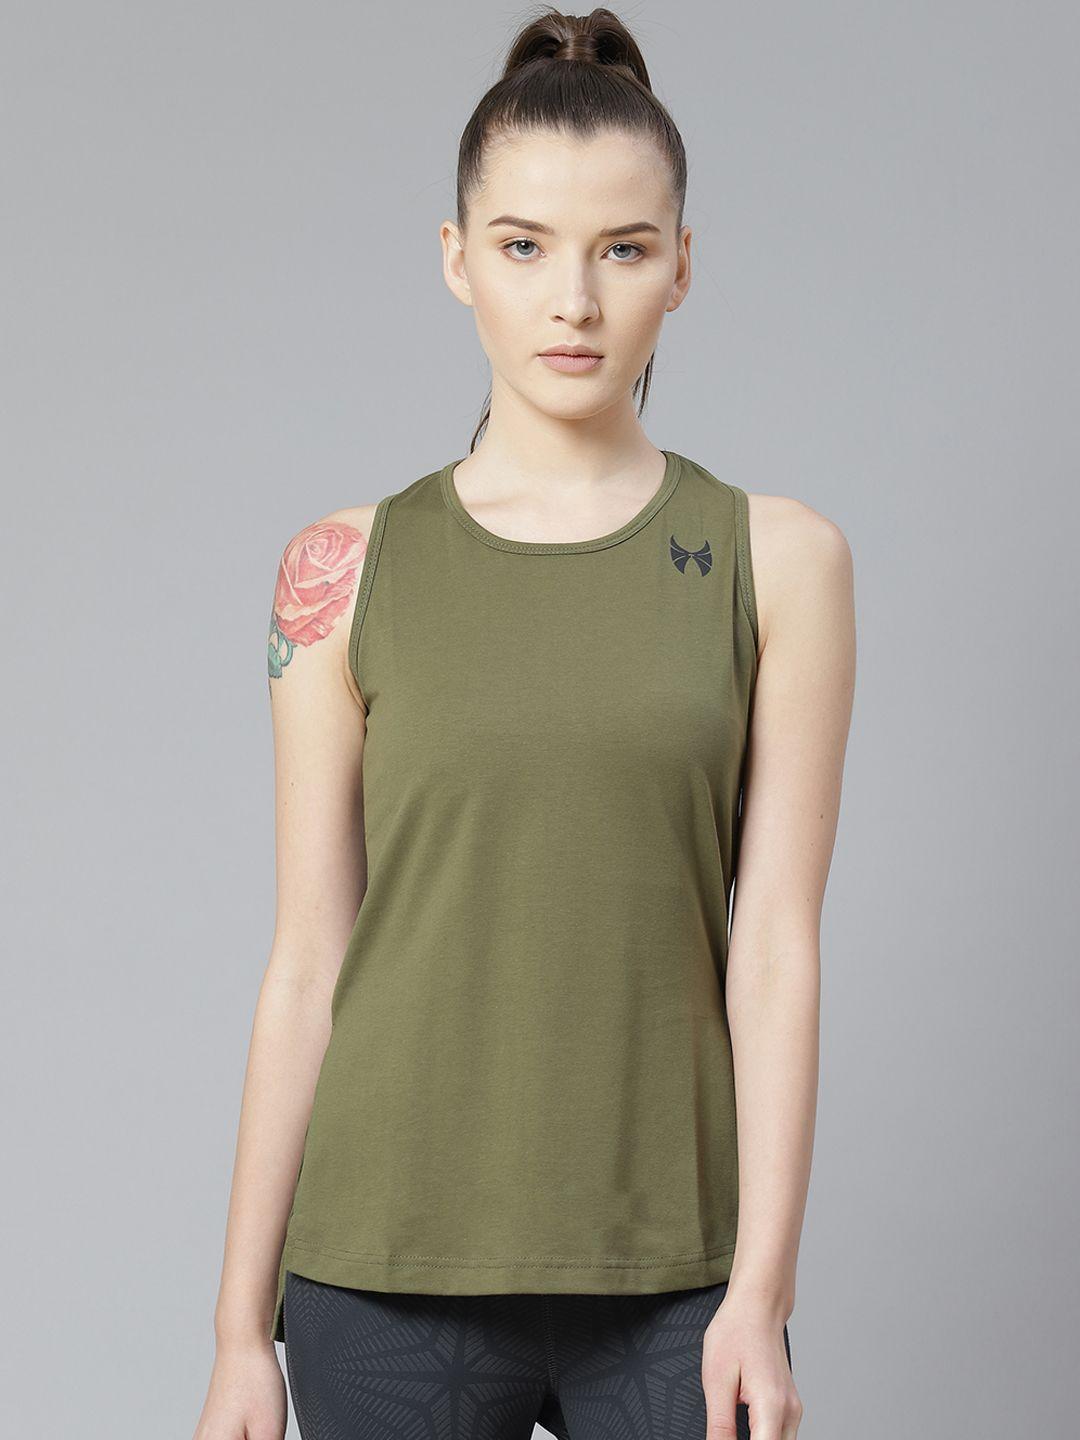 skyria women olive green solid tank top